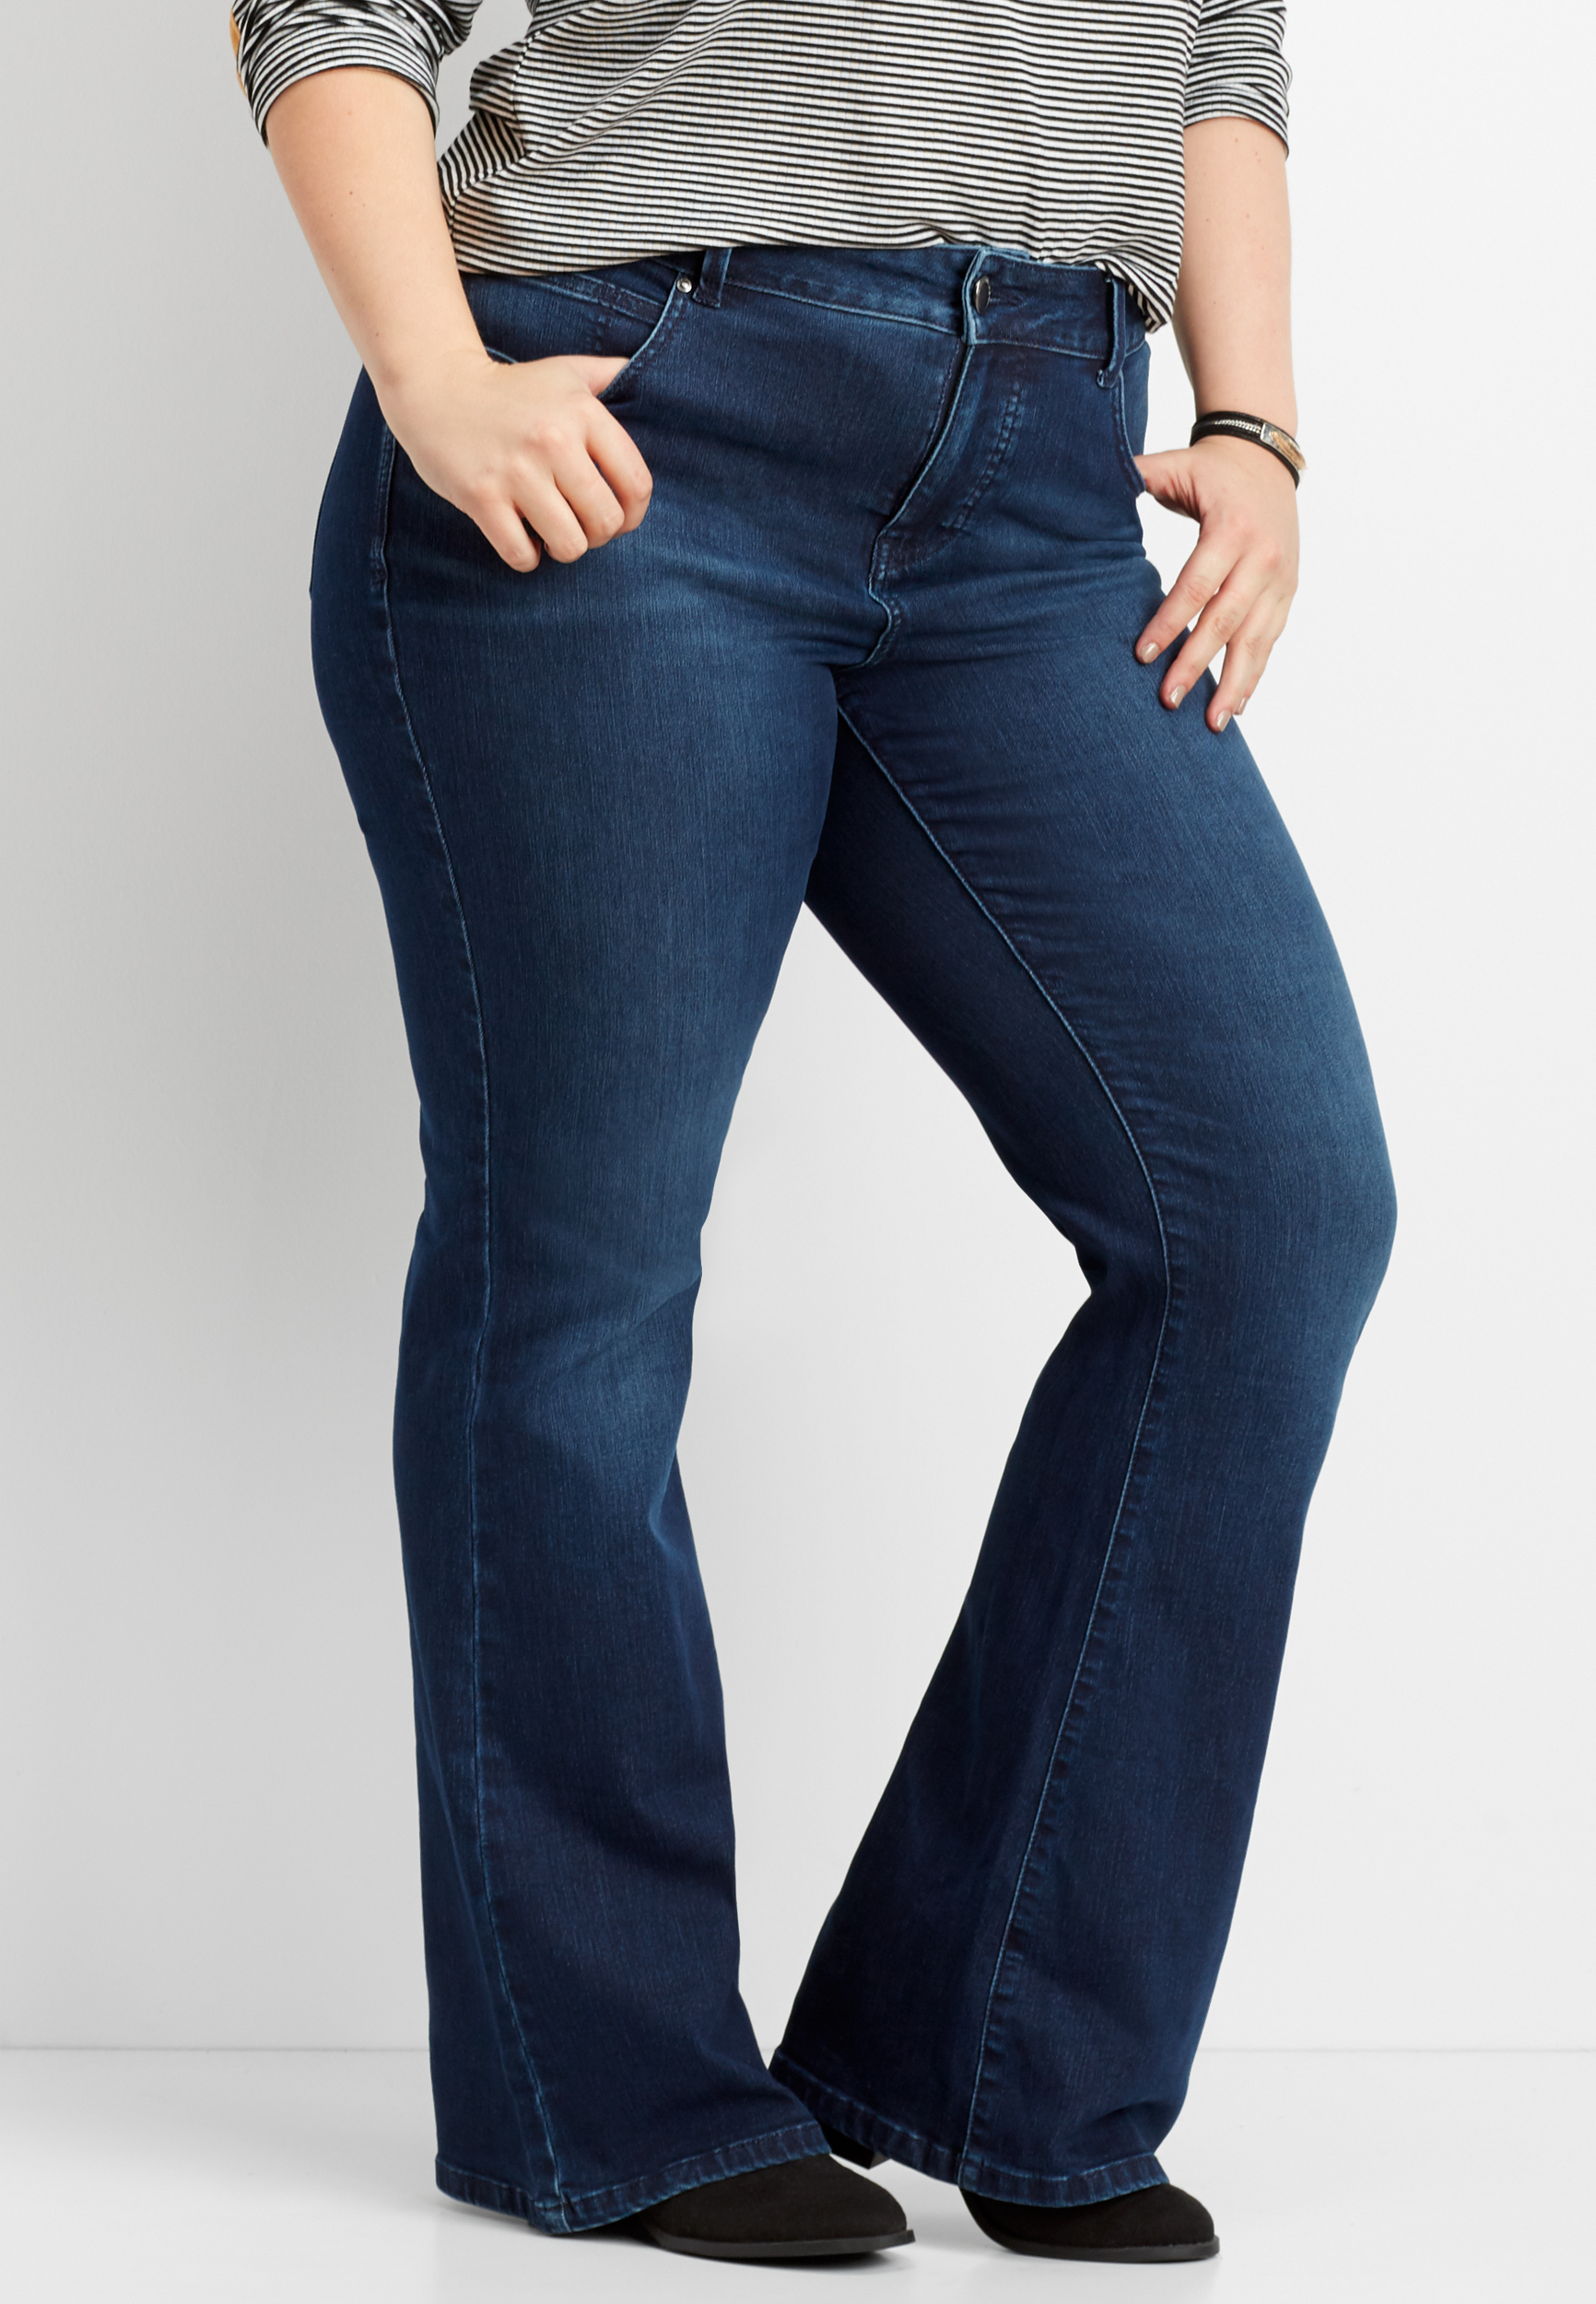 Plus Size Maurices Jeans | maurices